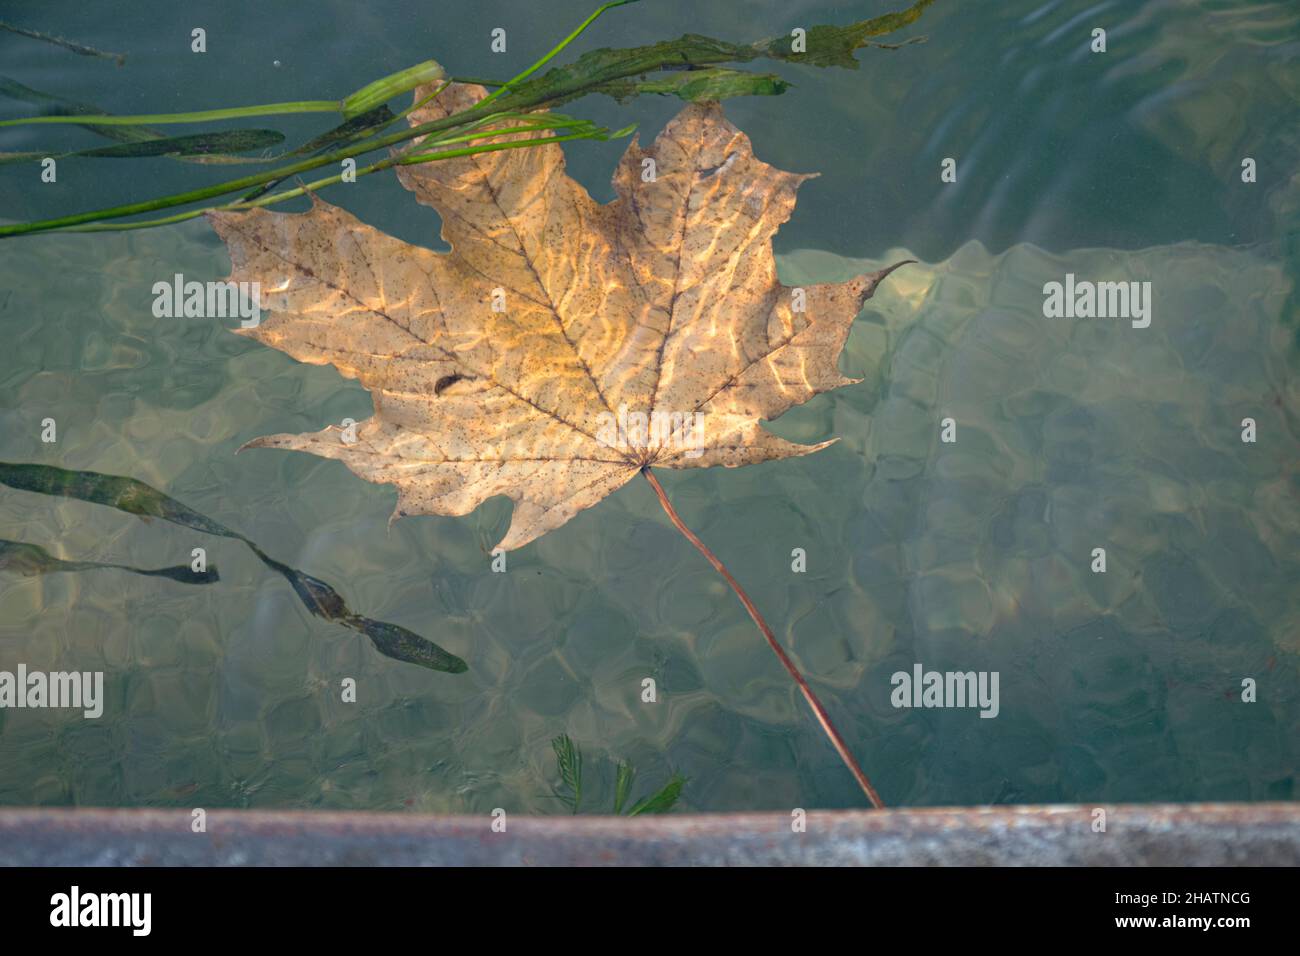 Autumn, a leaf floats on water. Stock Photo